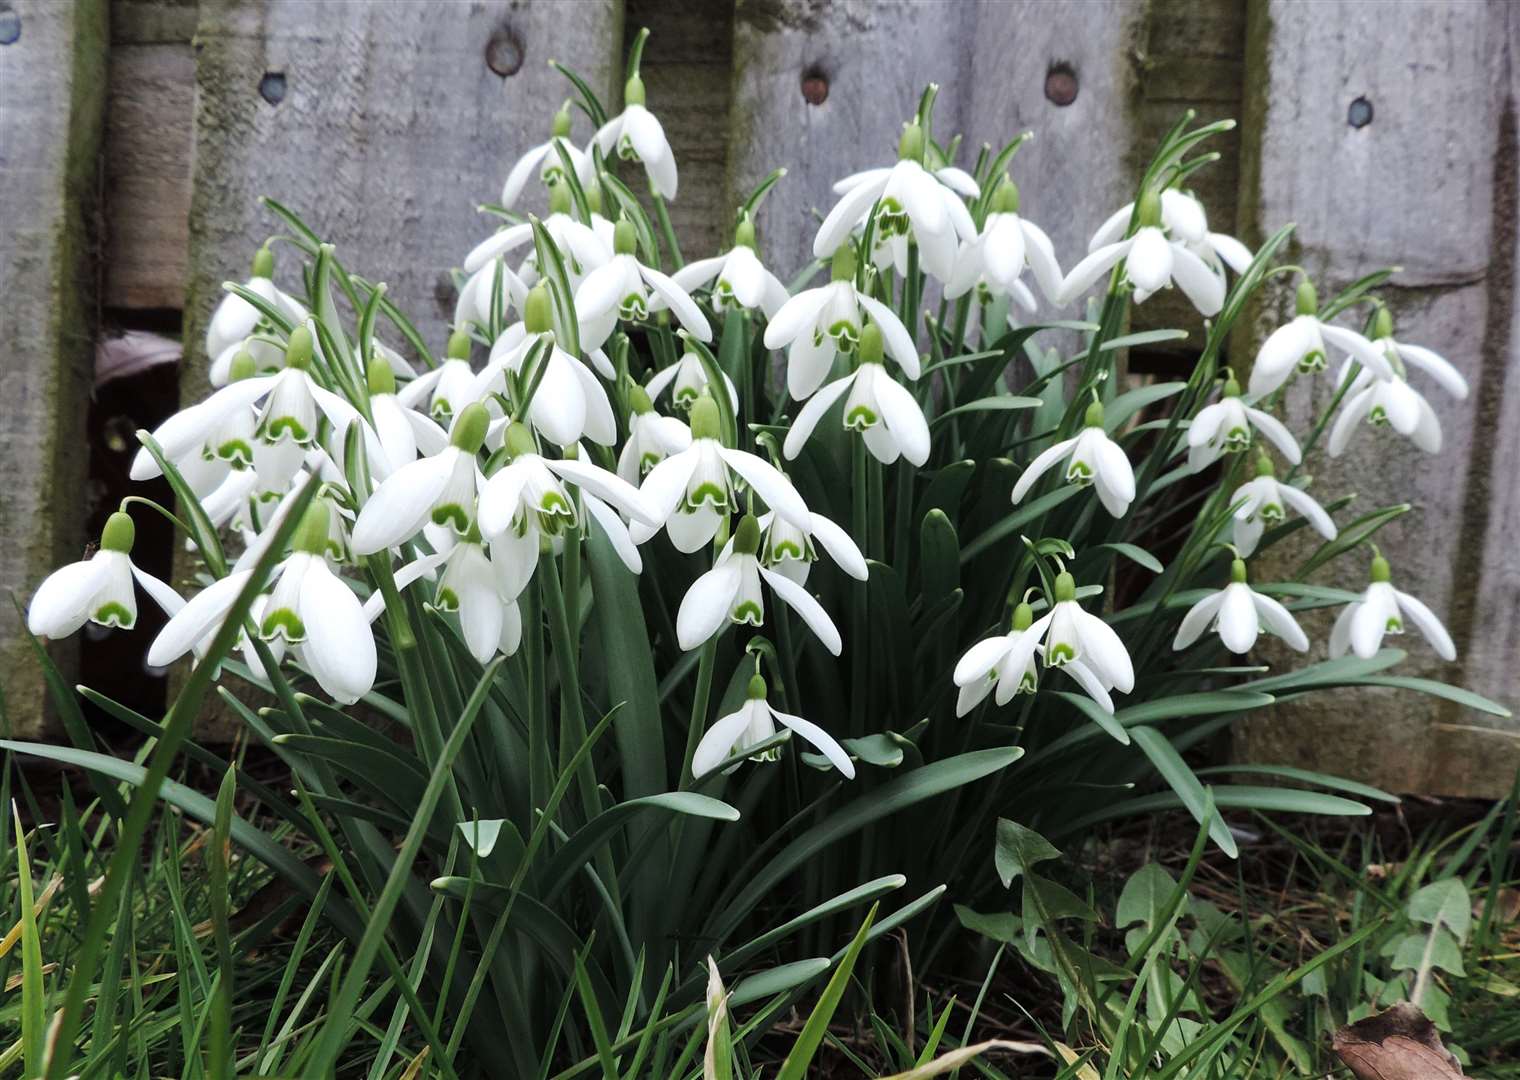 A clump of snowdrops captured in Nairn suggest spring is on the way. Picture: Elena Reid